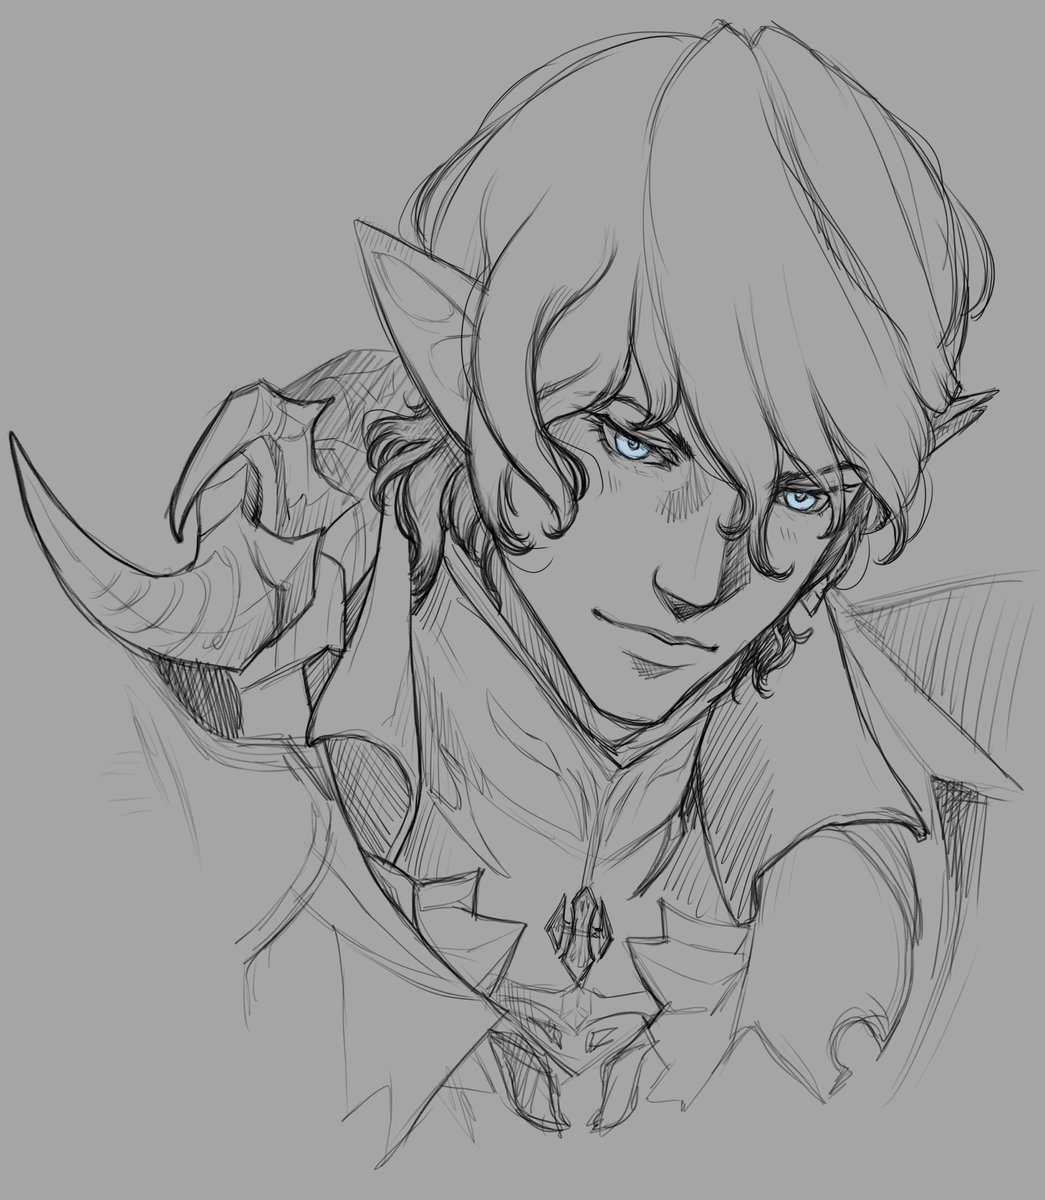 He gets me every time with those bedroom eyes 😍

#FINALFANTASYXIVOnline #finalfantasyxiv #FFXIV #FFXIVART #siraymeric #Aymeric #fanart #hessohot #ugh